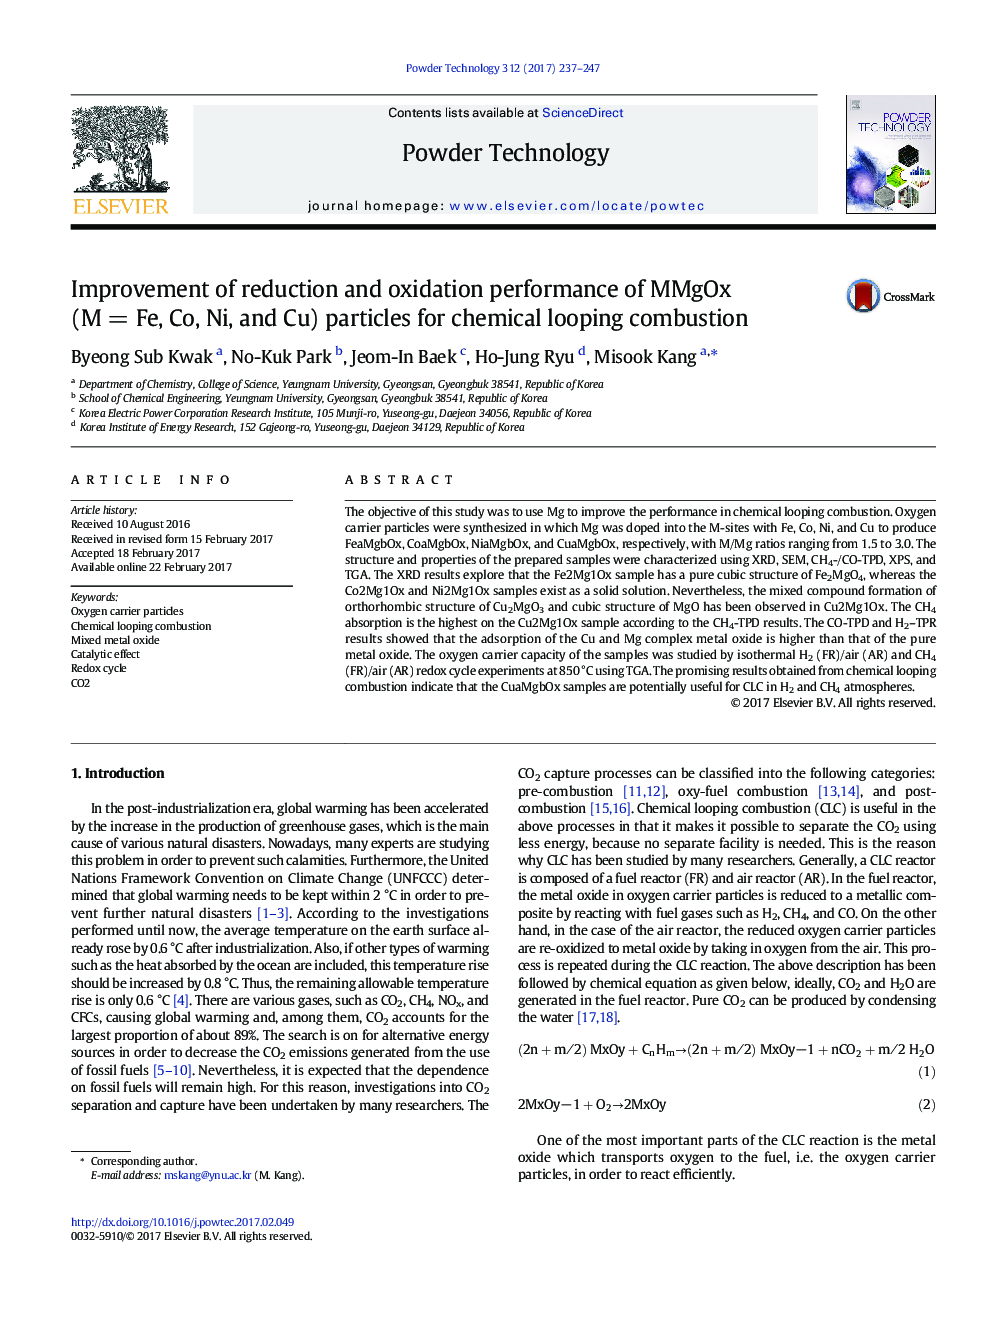 Improvement of reduction and oxidation performance of MMgOx (MÂ =Â Fe, Co, Ni, and Cu) particles for chemical looping combustion